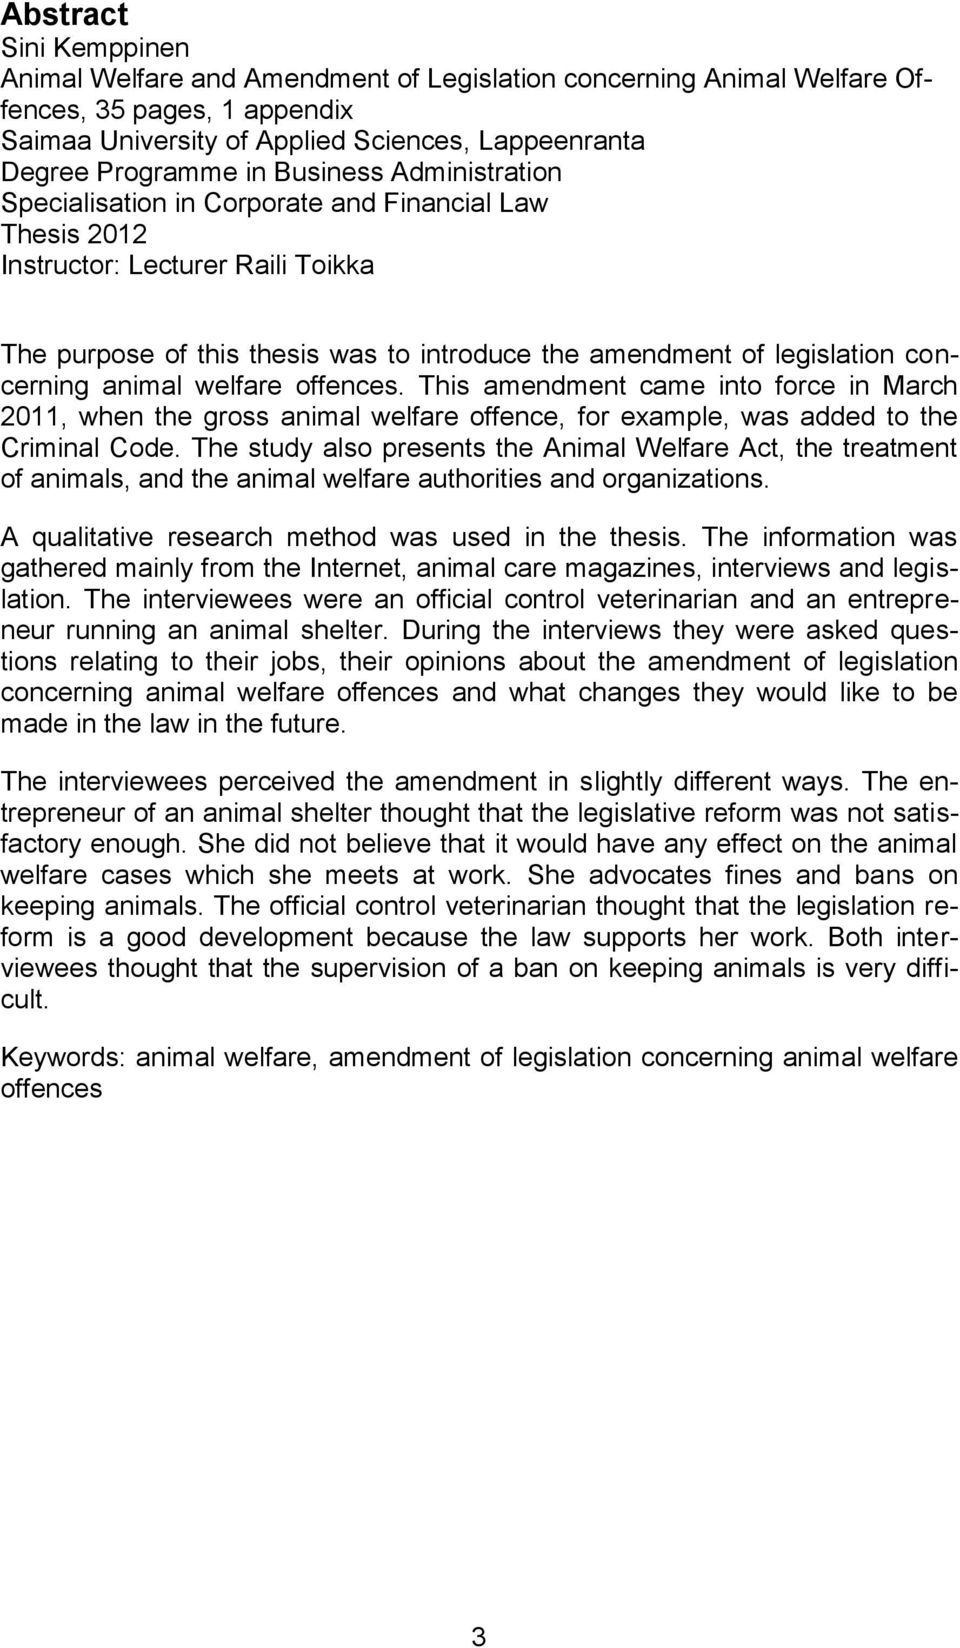 animal welfare offences. This amendment came into force in March 2011, when the gross animal welfare offence, for example, was added to the Criminal Code.